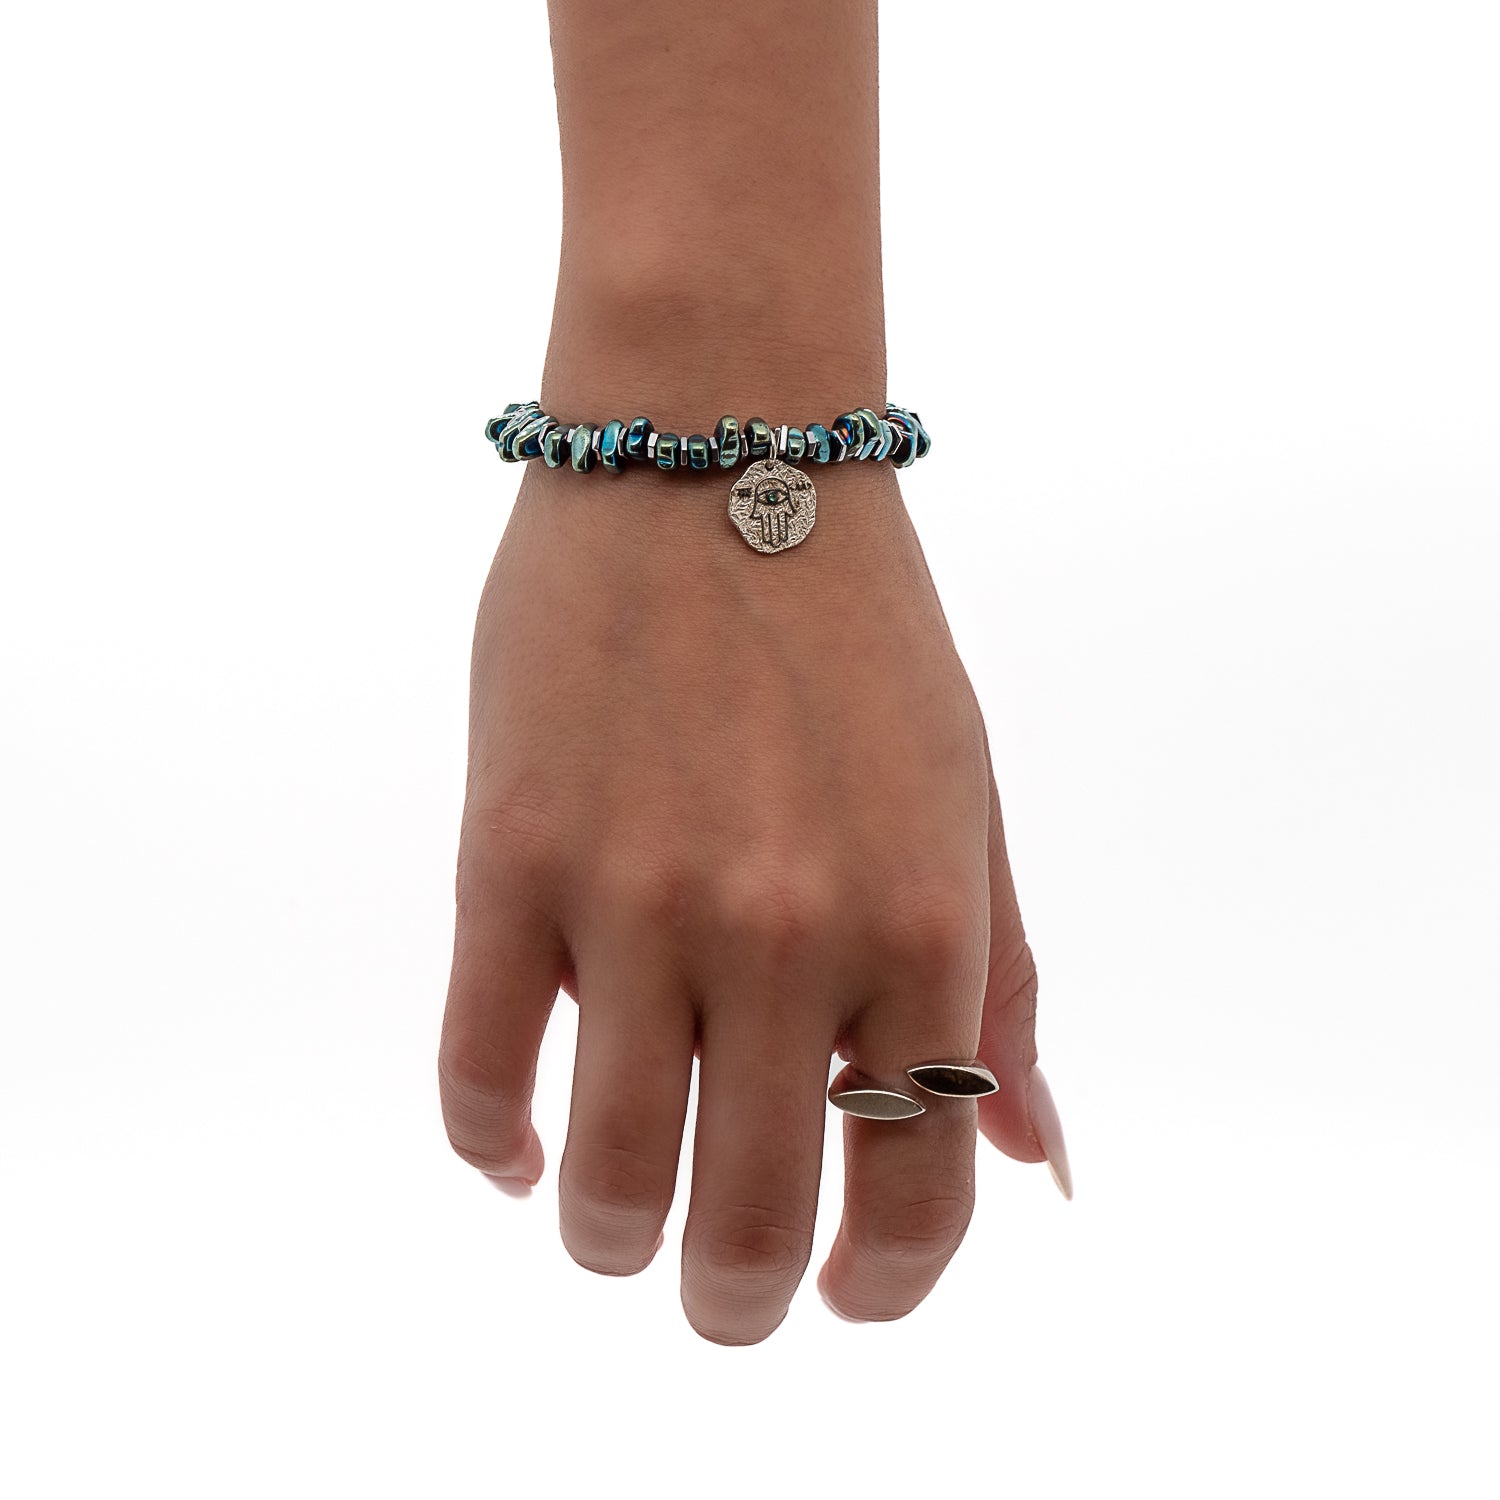 Another hand model wearing the Guardian Hamsa Bracelet, demonstrating its versatility and how it can be stacked with other bracelets or worn alone. 